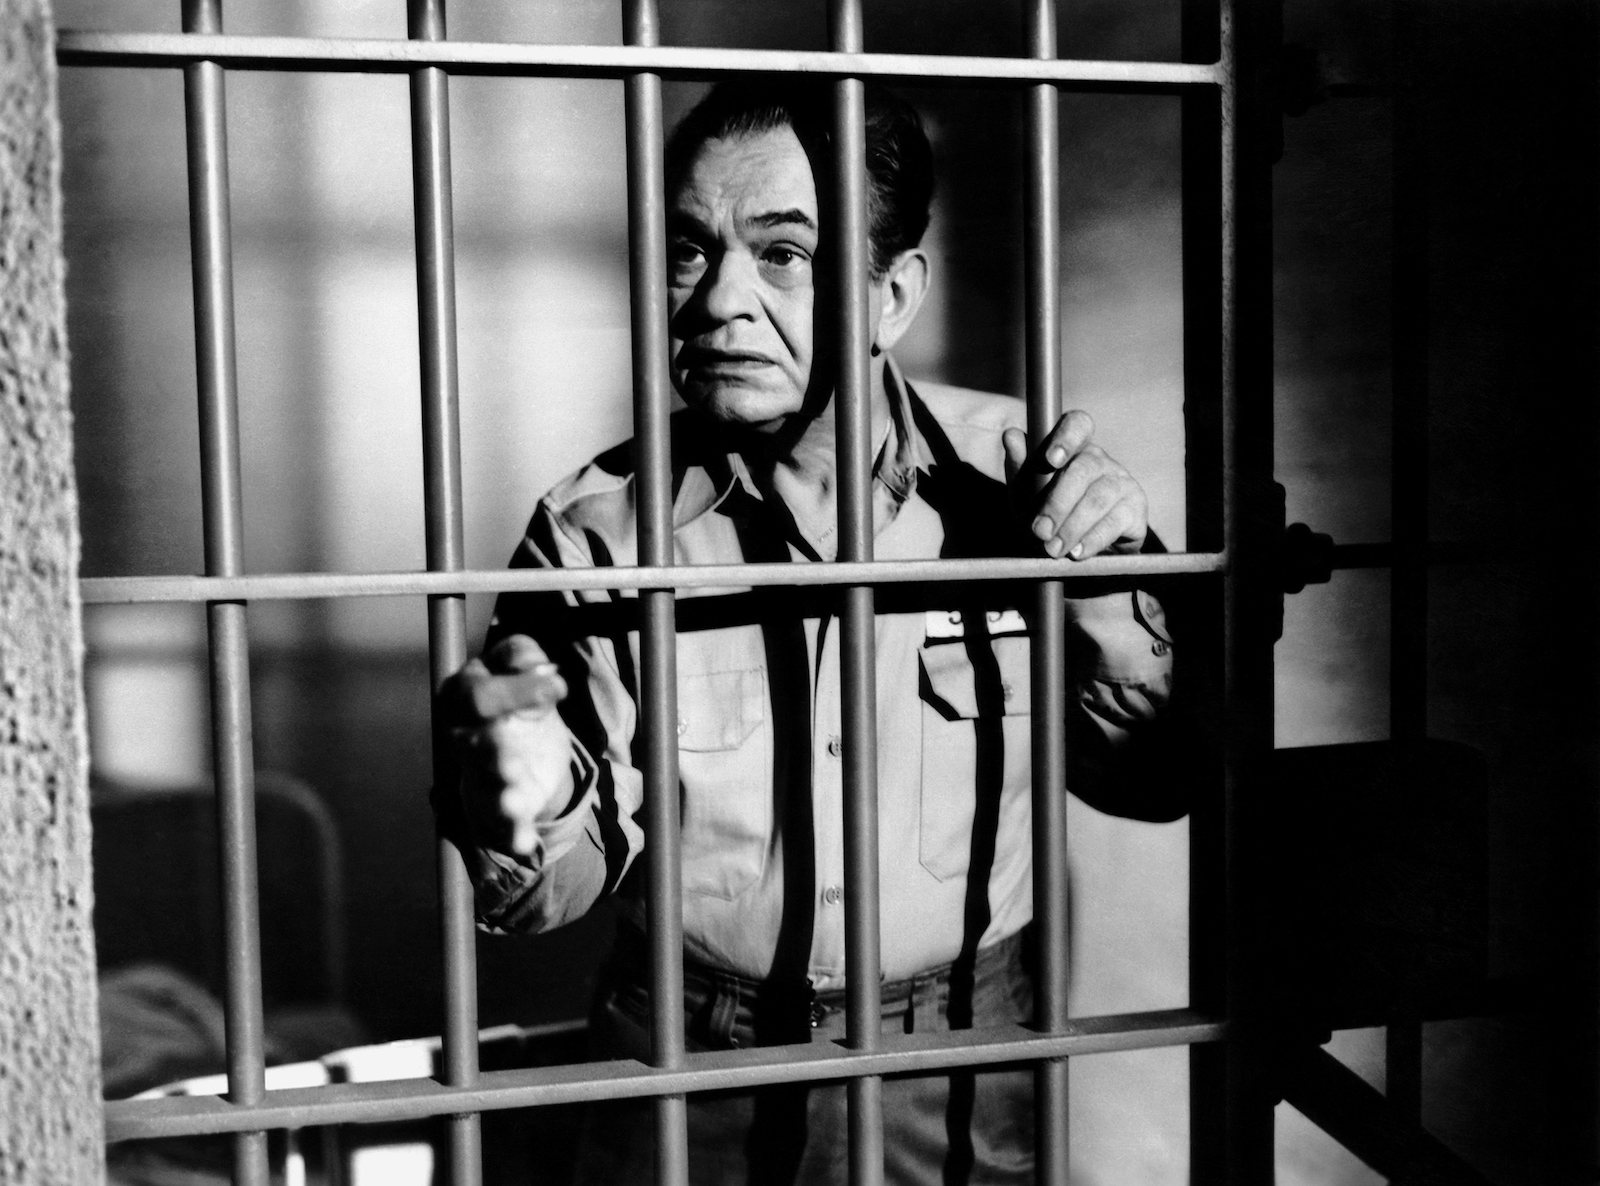 A black-and-white film still of a man behind bars